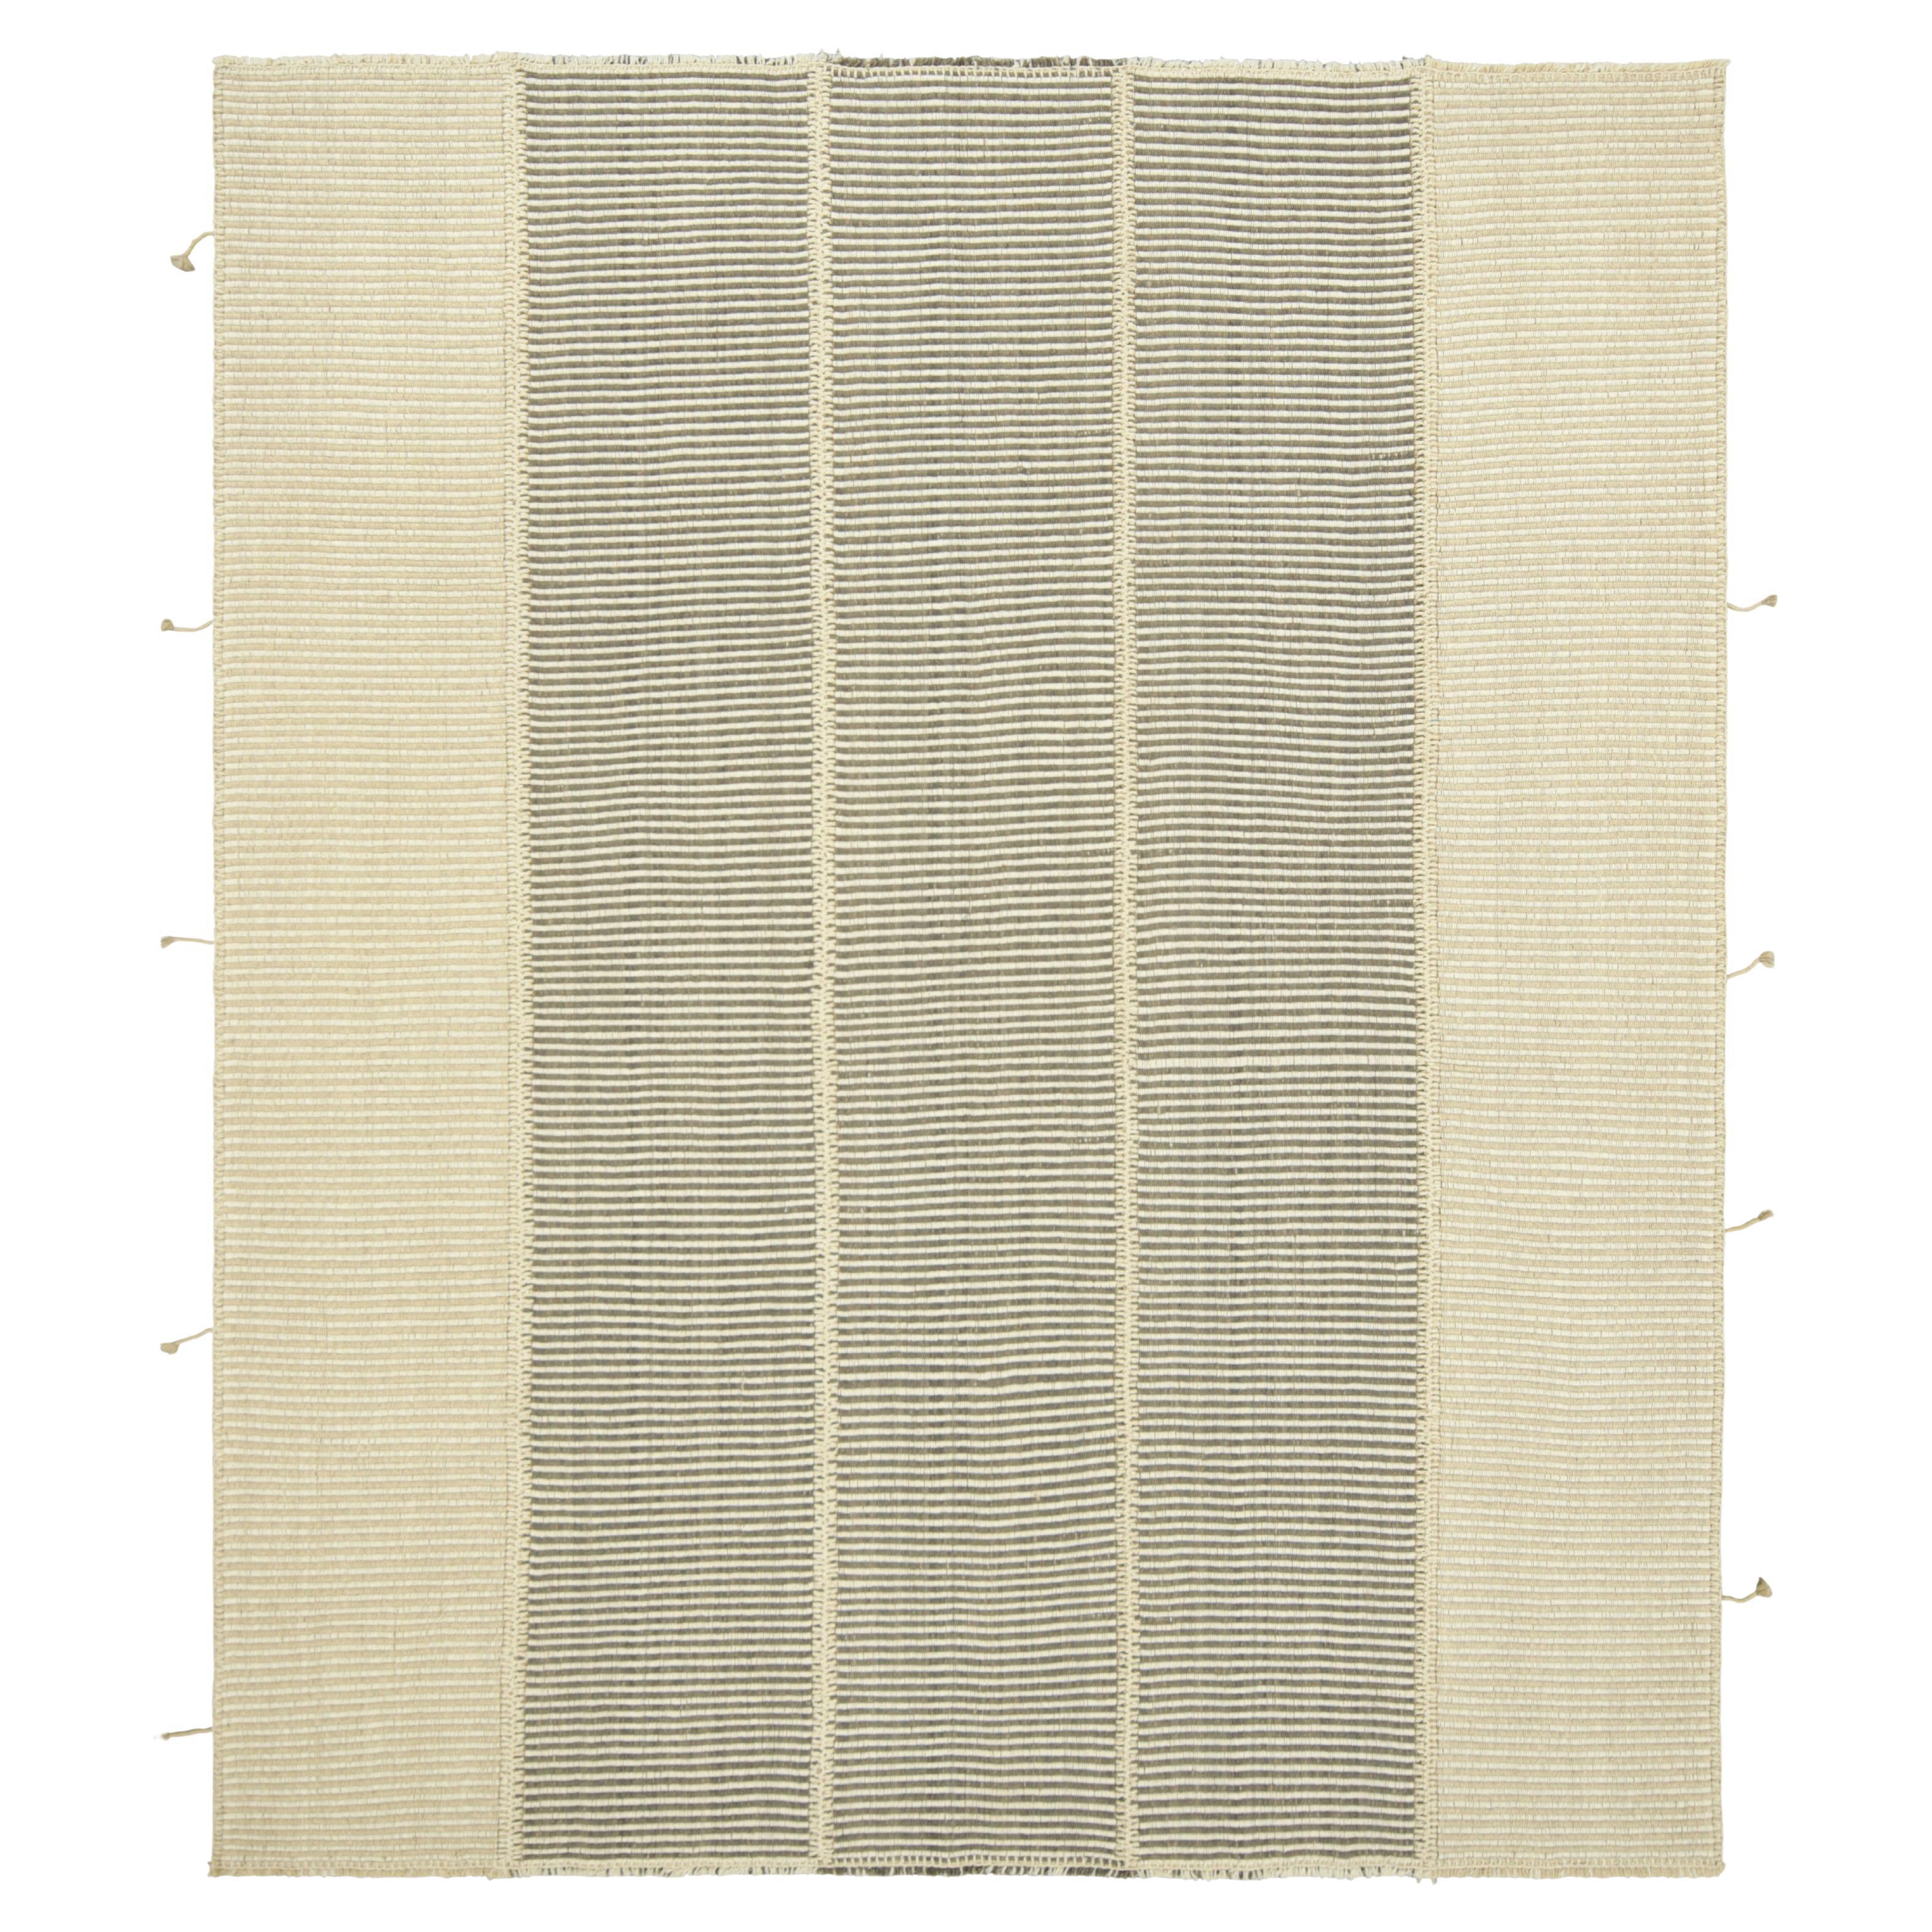 Rug & Kilim’s Contemporary Kilim in White, Beige and Gray Textural Stripes